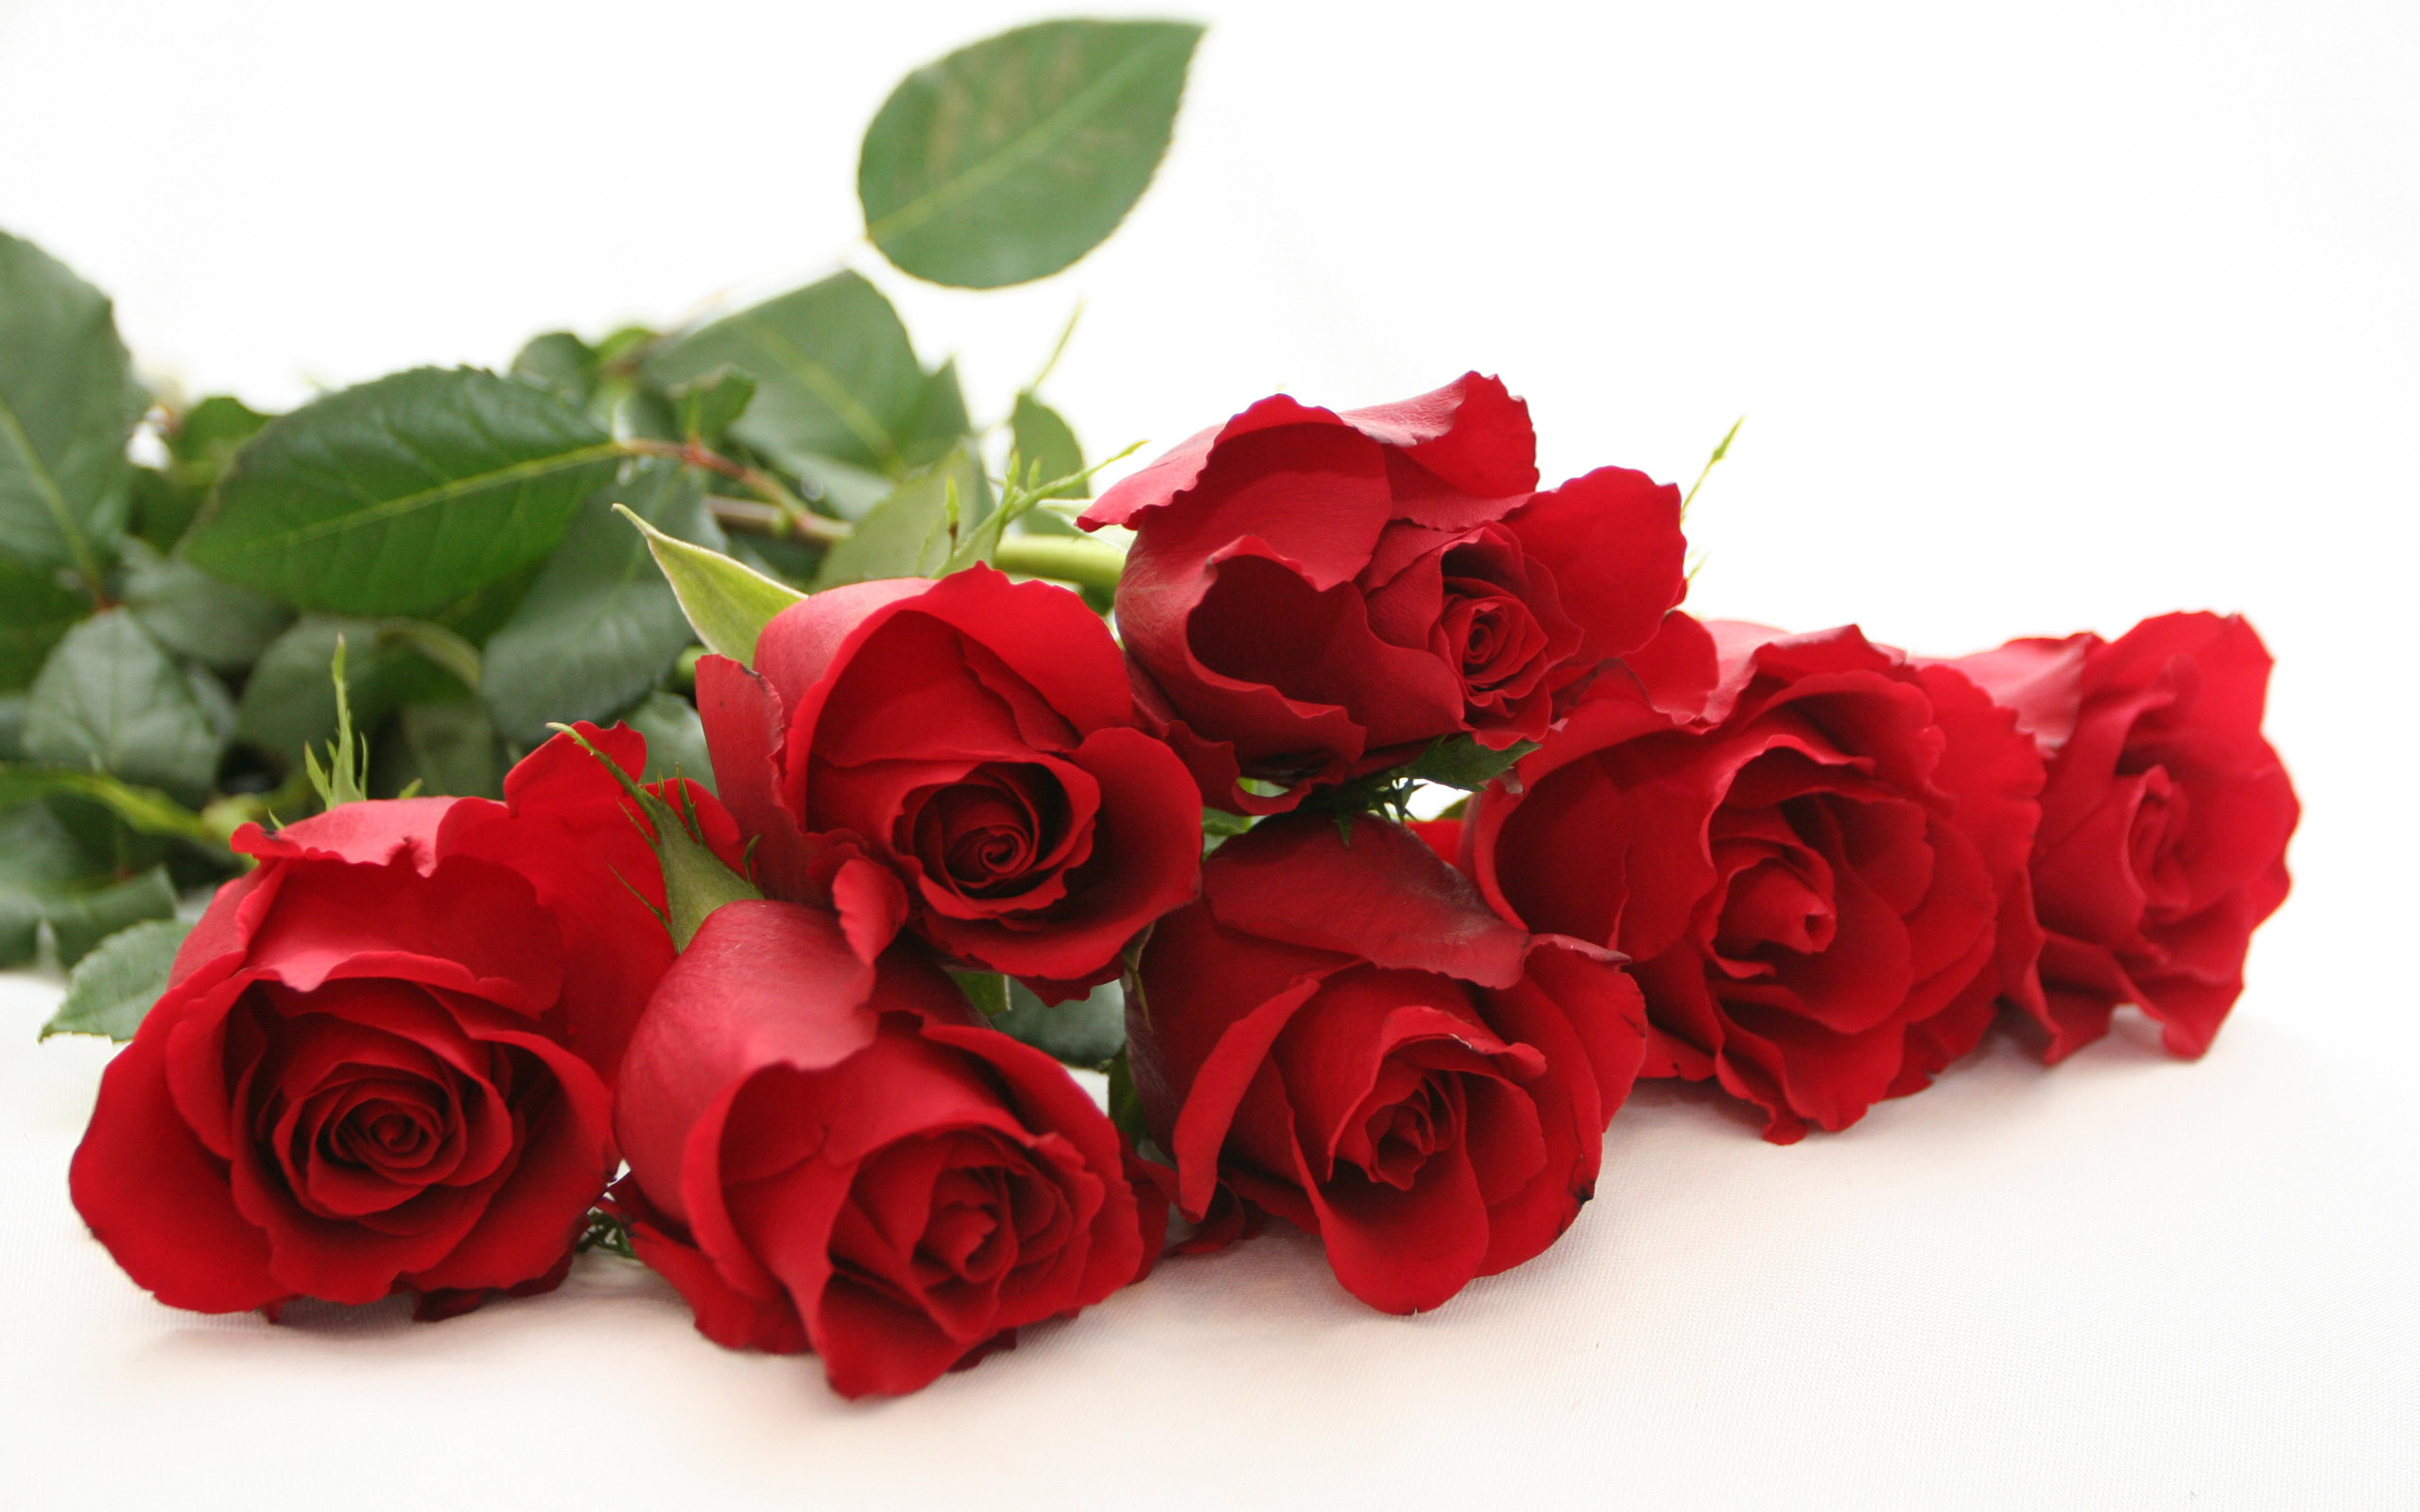 Red roses love day image